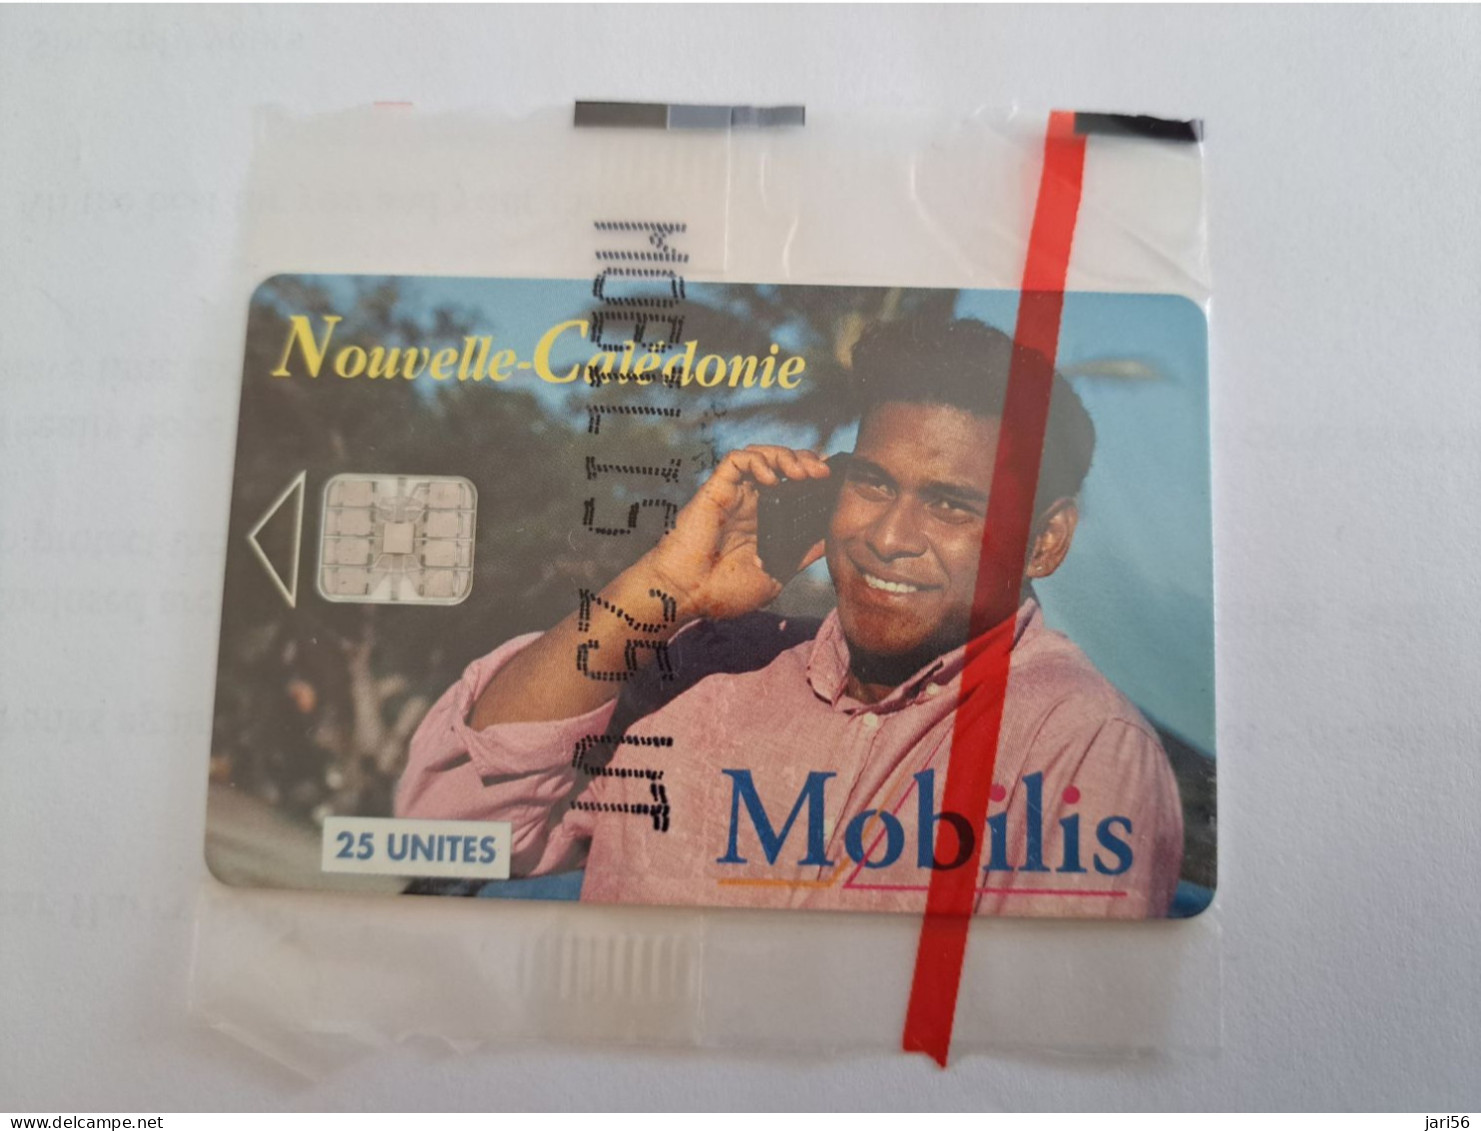 NOUVELLE CALEDONIA  CHIP CARD 25  UNITS / MAN ON THE PHONE /MOBILIS   / MINT IN WRAPPER  ** 13546 ** - Nouvelle-Calédonie